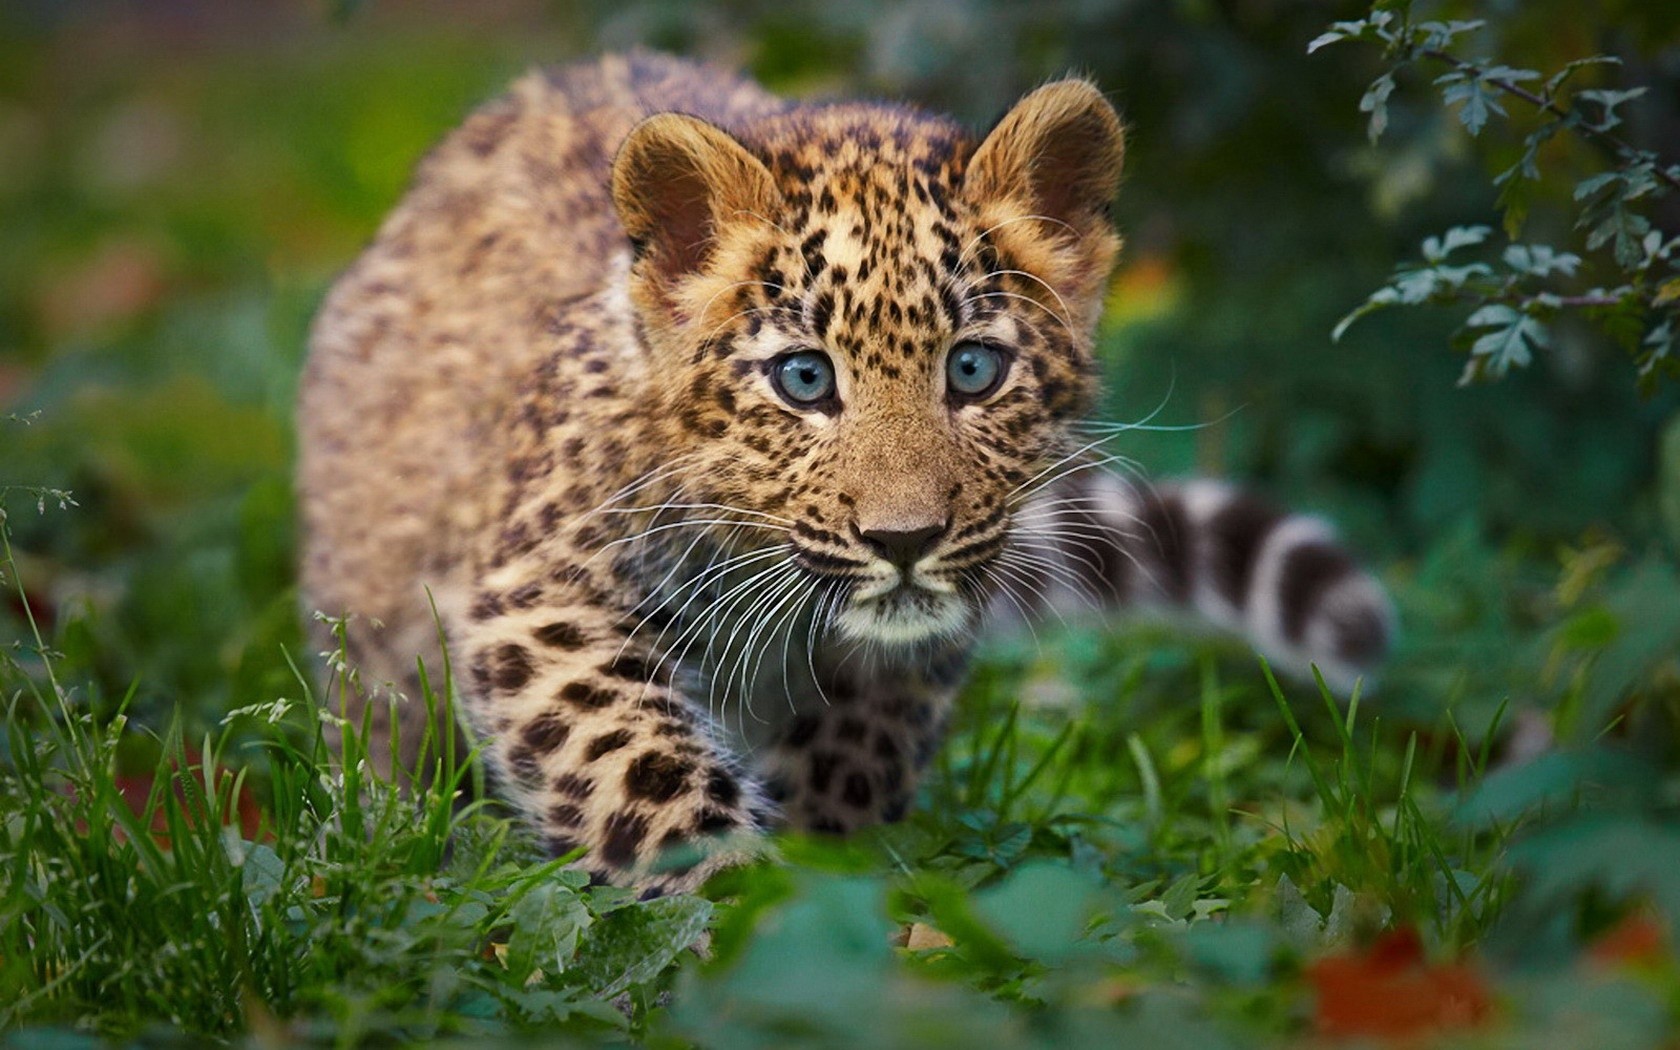 Wild Cats Wallpaper Cubs Displaying Image For